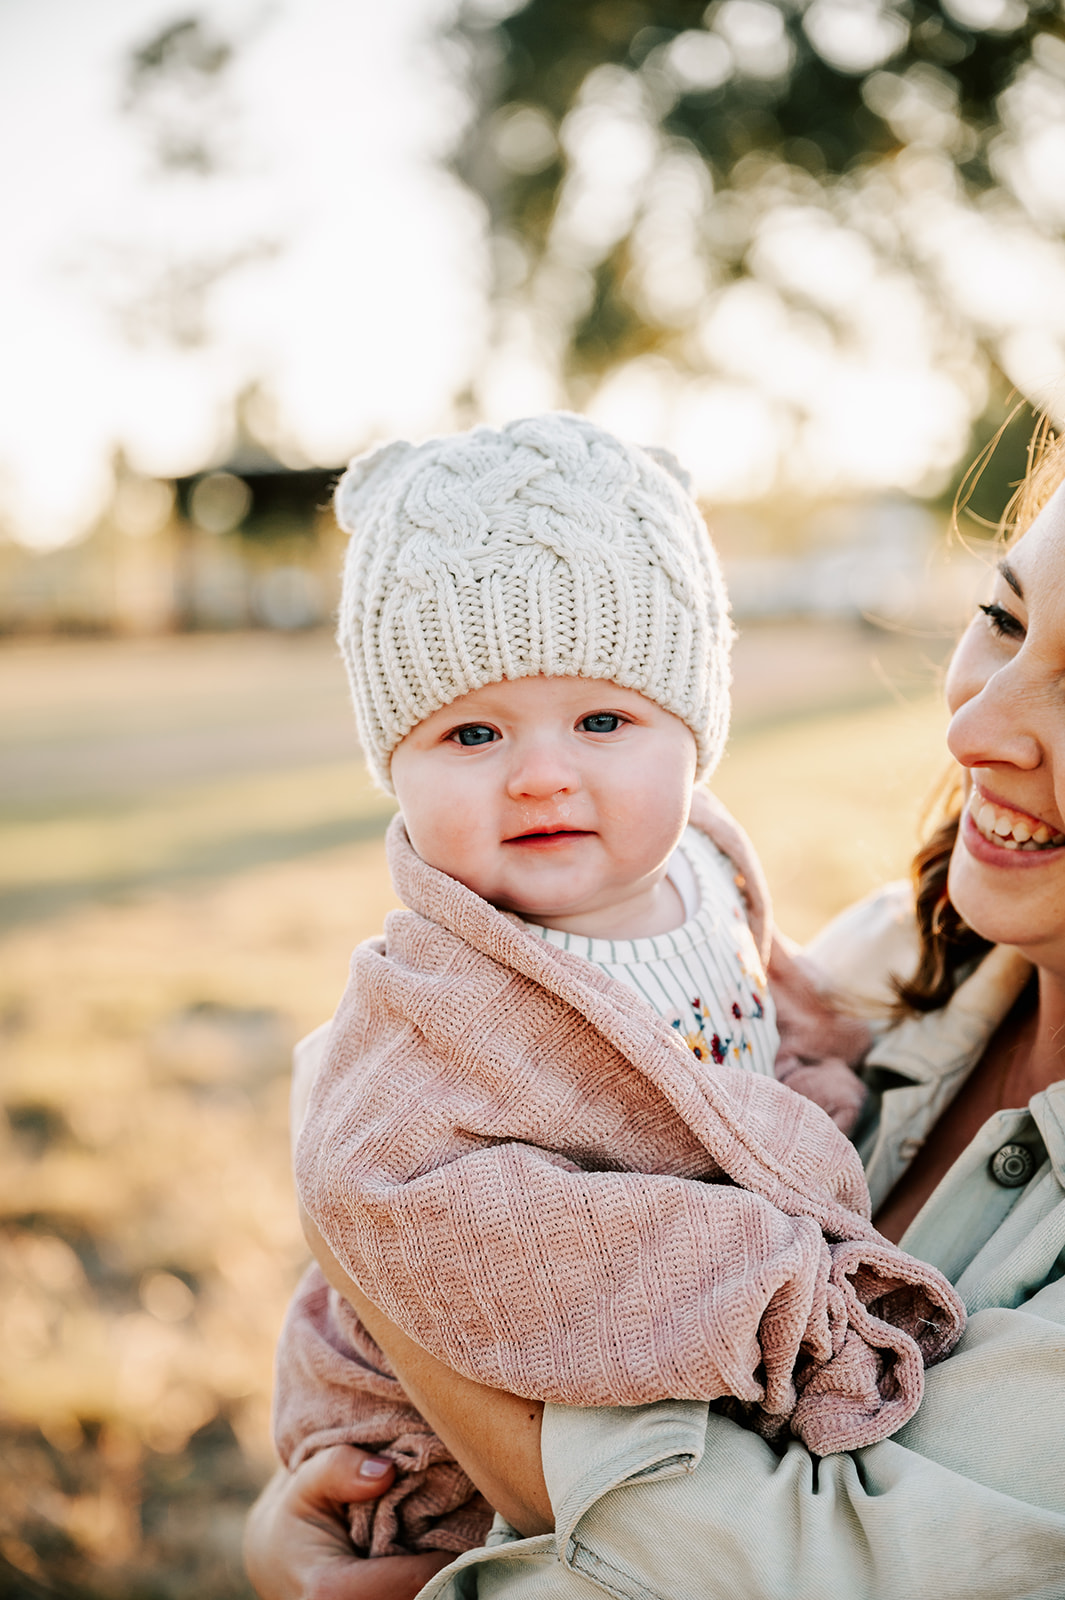 An infant in mom's arms smiles in a white beanie and wrapped in a pink blanket during some Charlotte Fall Activities